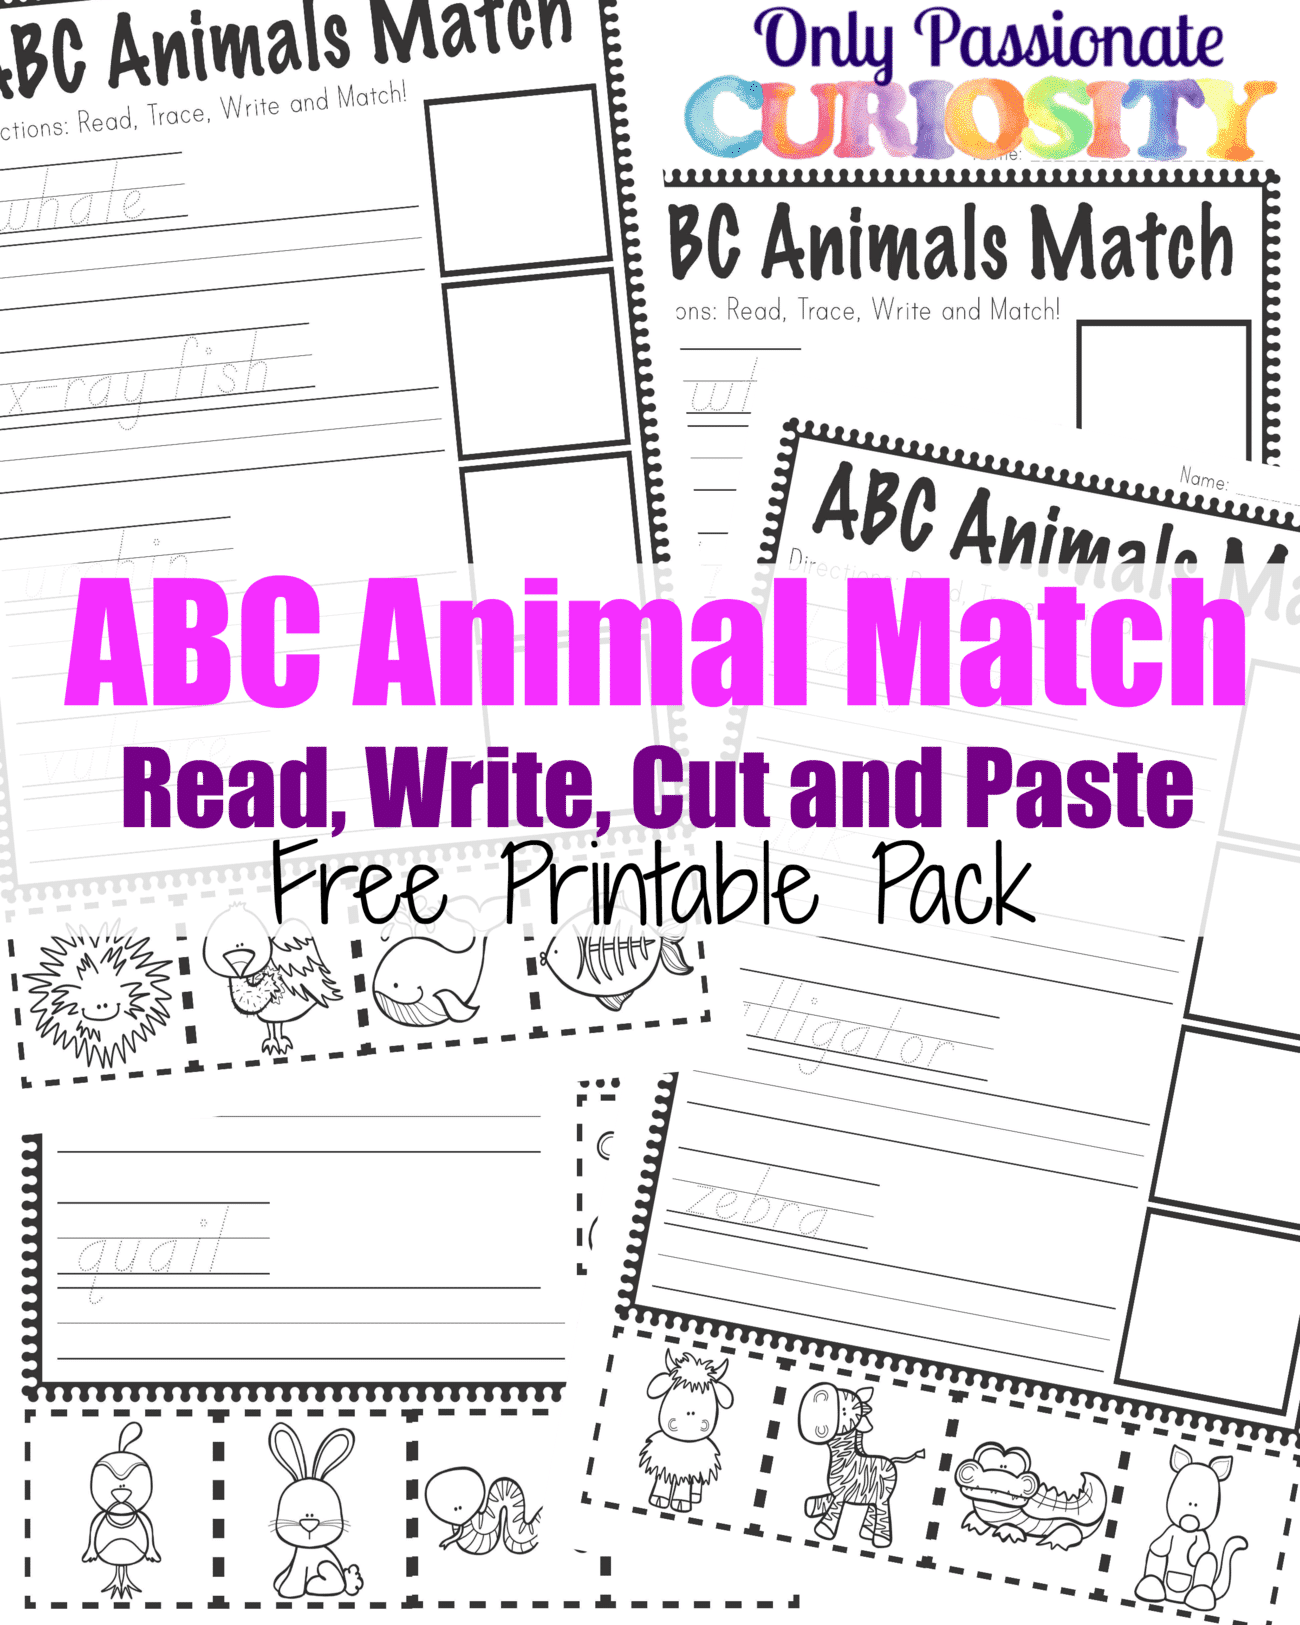 ABC Animals Read, Write, Cut and Paste Pack